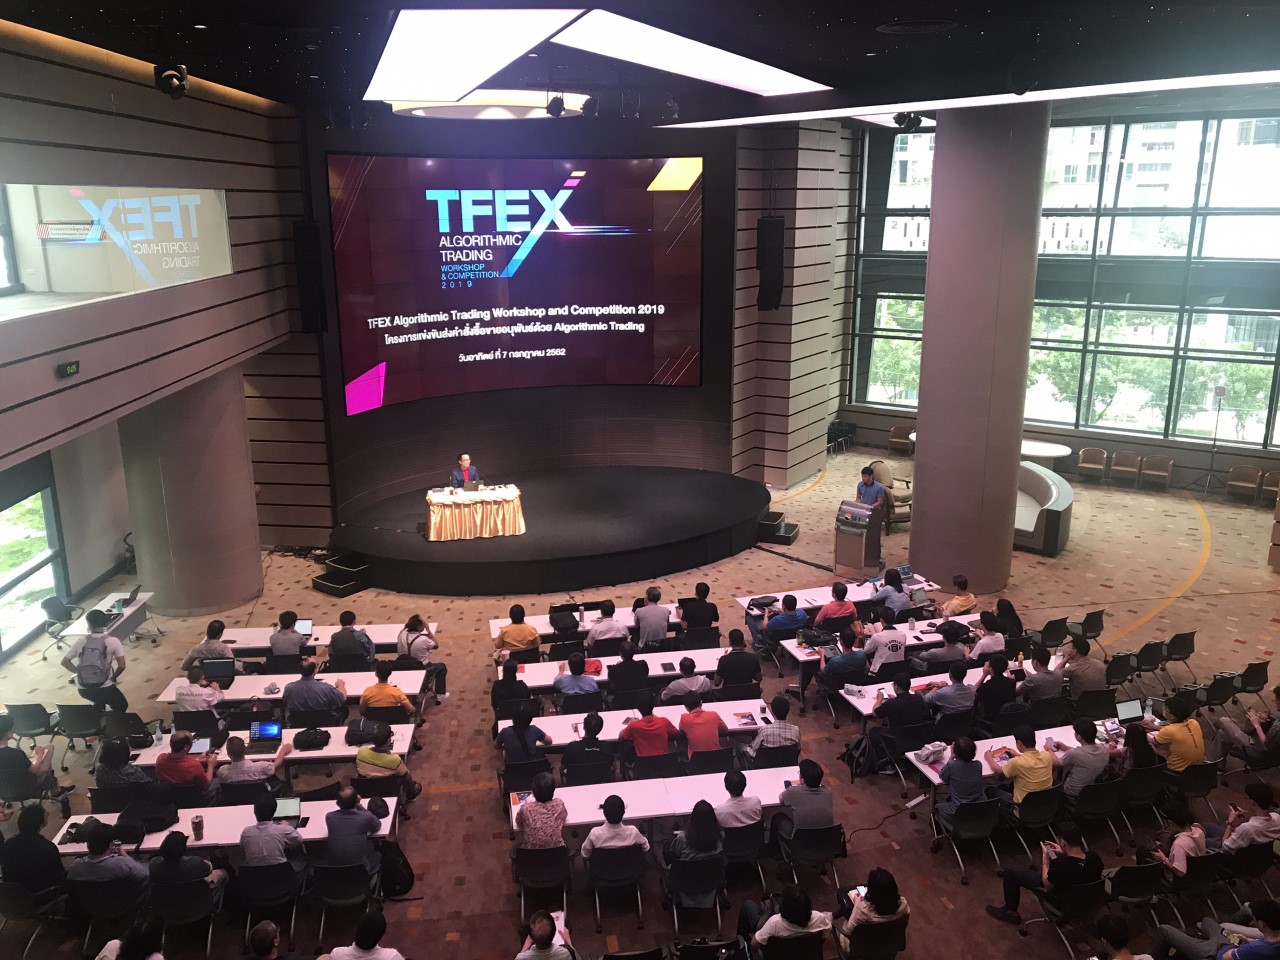 TFEX เปิดเทรนก่อนแข่งขัน “TFEX Algorithmic Trading Workshop and Competition 2019”